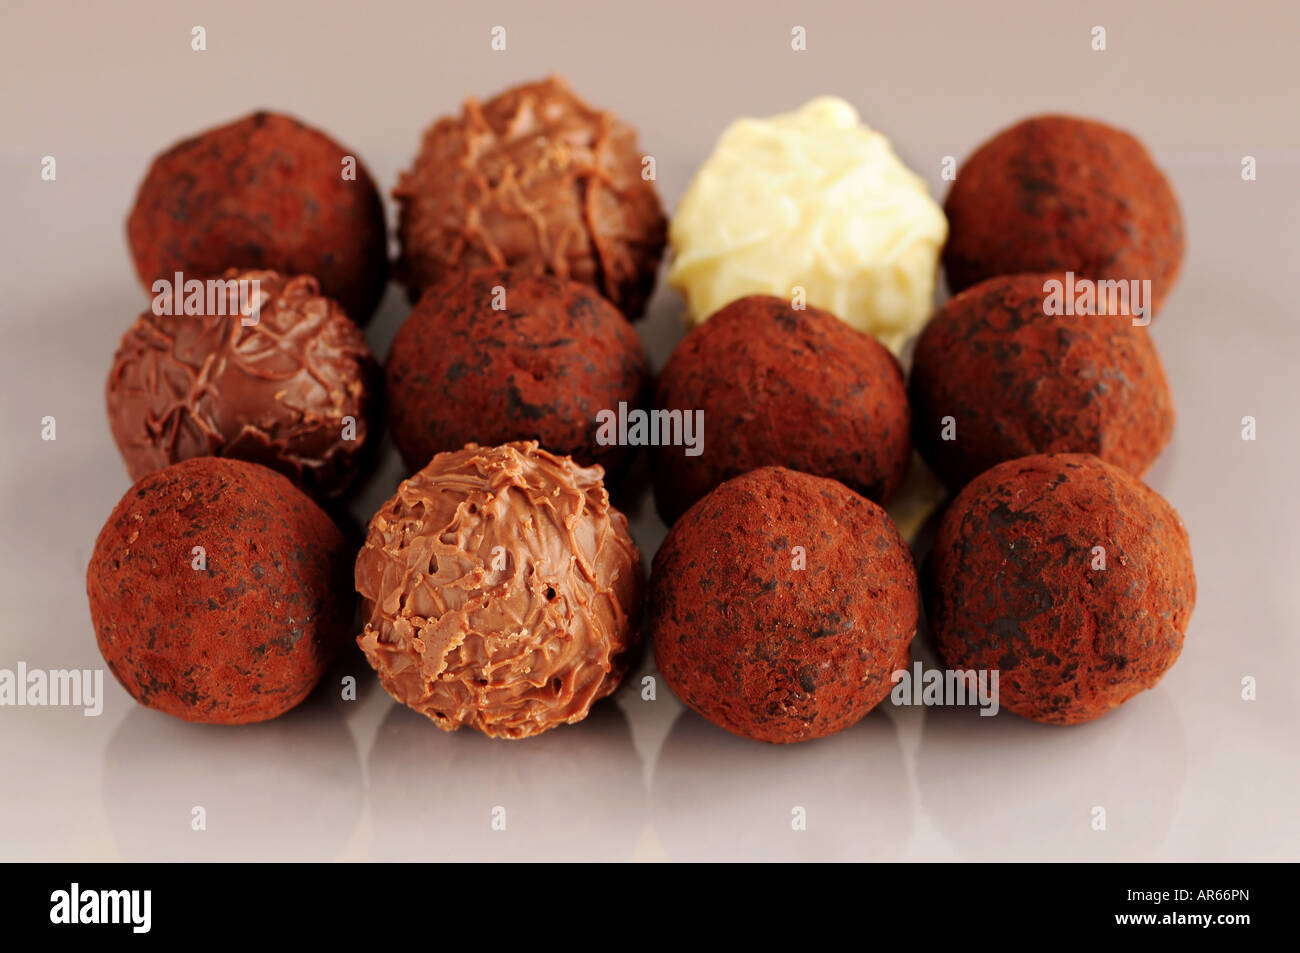 Several assorted chocolate truffles in rows on brown background Stock Photo